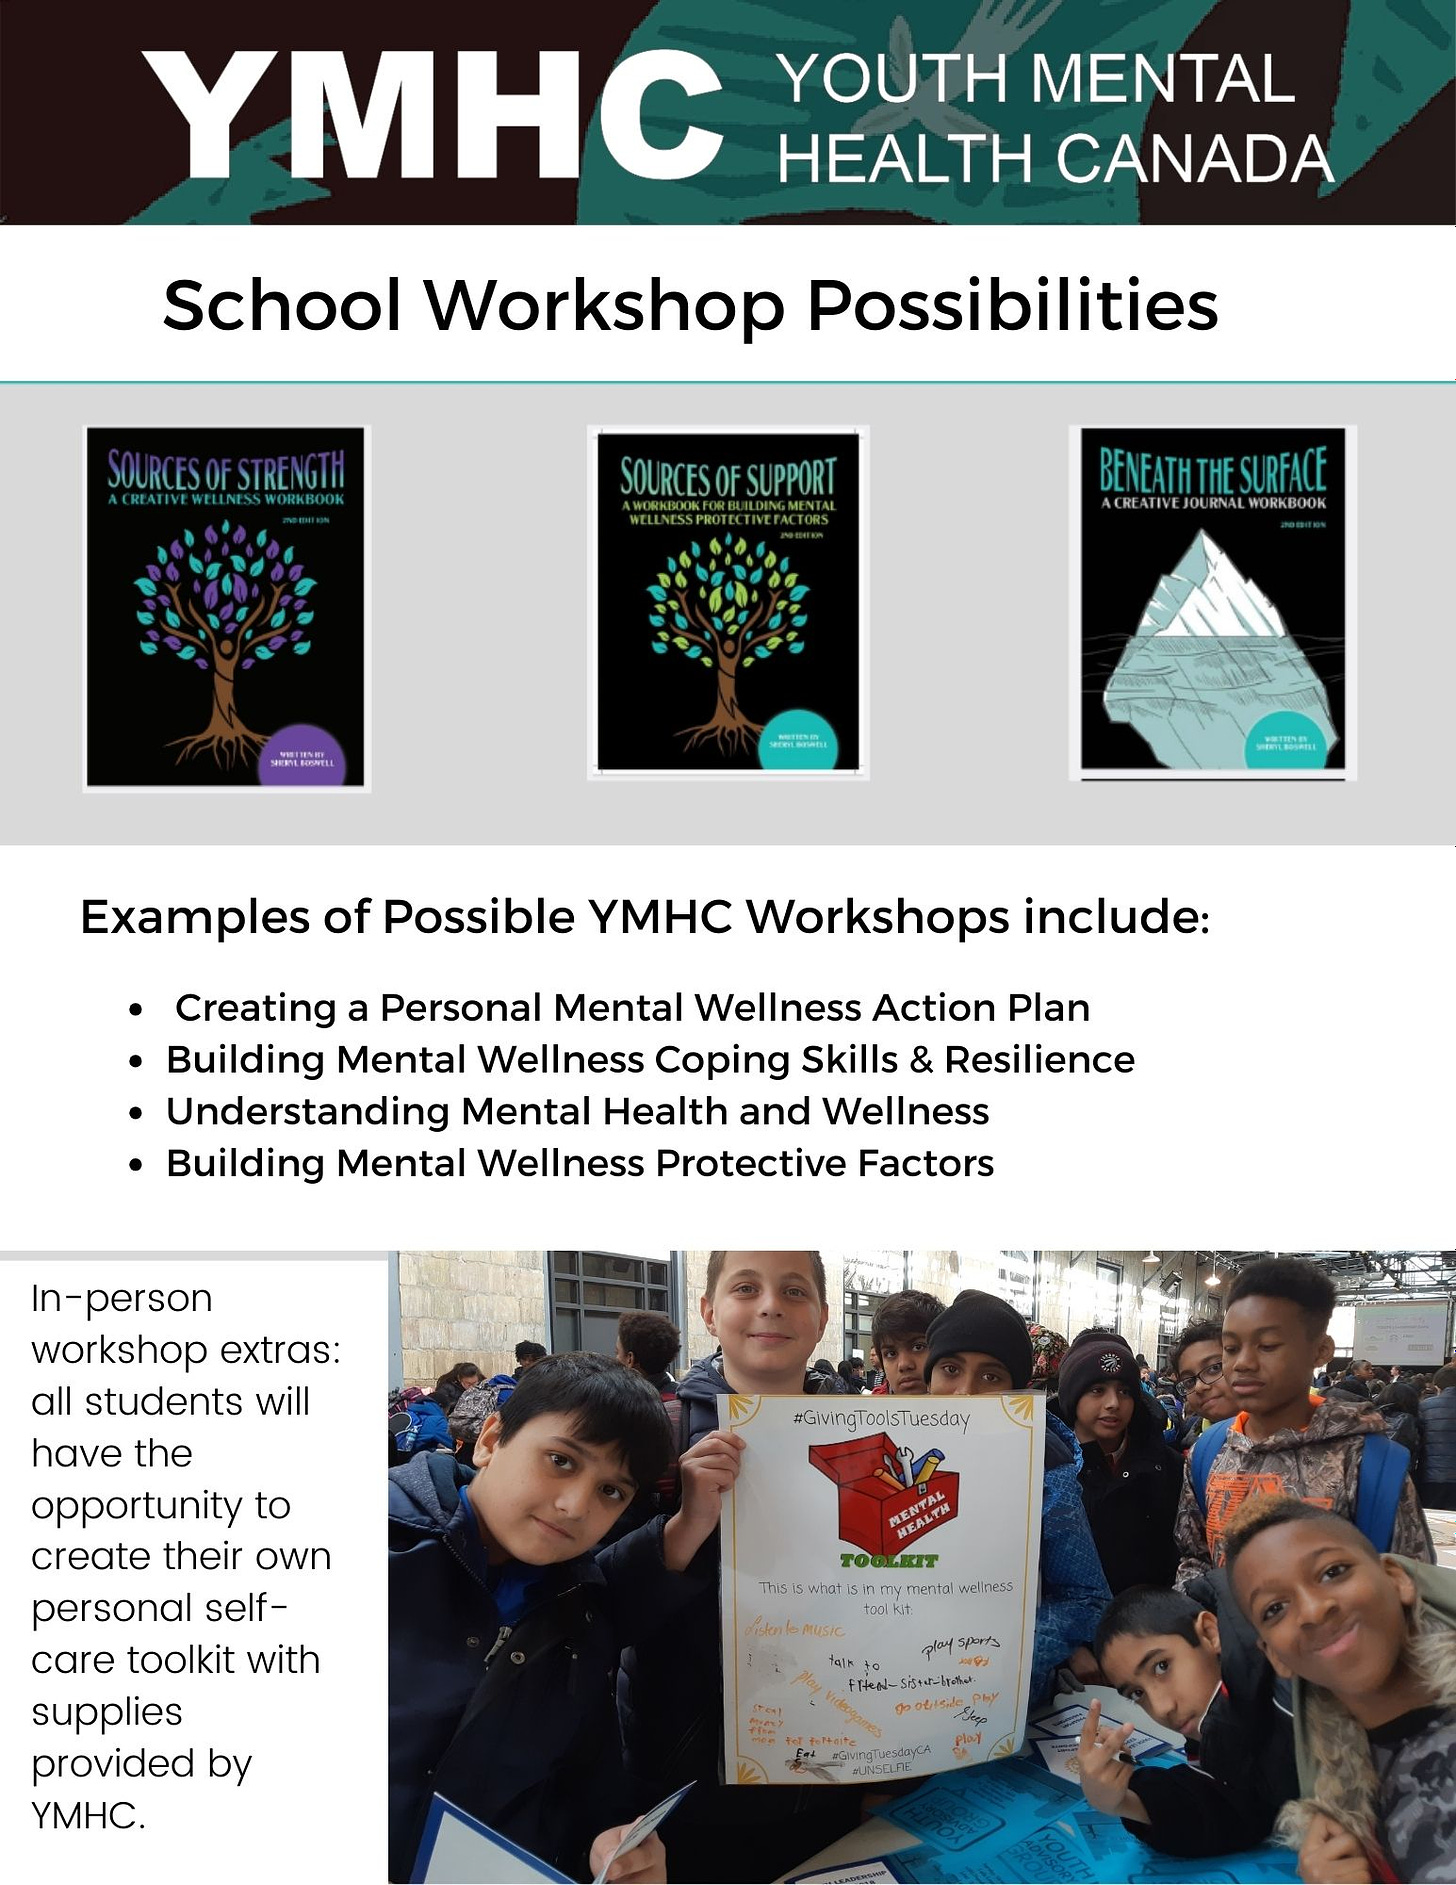 School Workshop Possibilities Examples of Possible YMHC Workshops include: Creating a Personal Mental Wellness Action Plan Building Mental Wellness Coping Skills & Resilience Understanding Mental Health and Wellness Building Mental Wellness Protective Factors  In-person workshop extras: all students will have the opportunity to create their own personal self-care toolkit with supplies provided by YMHC.